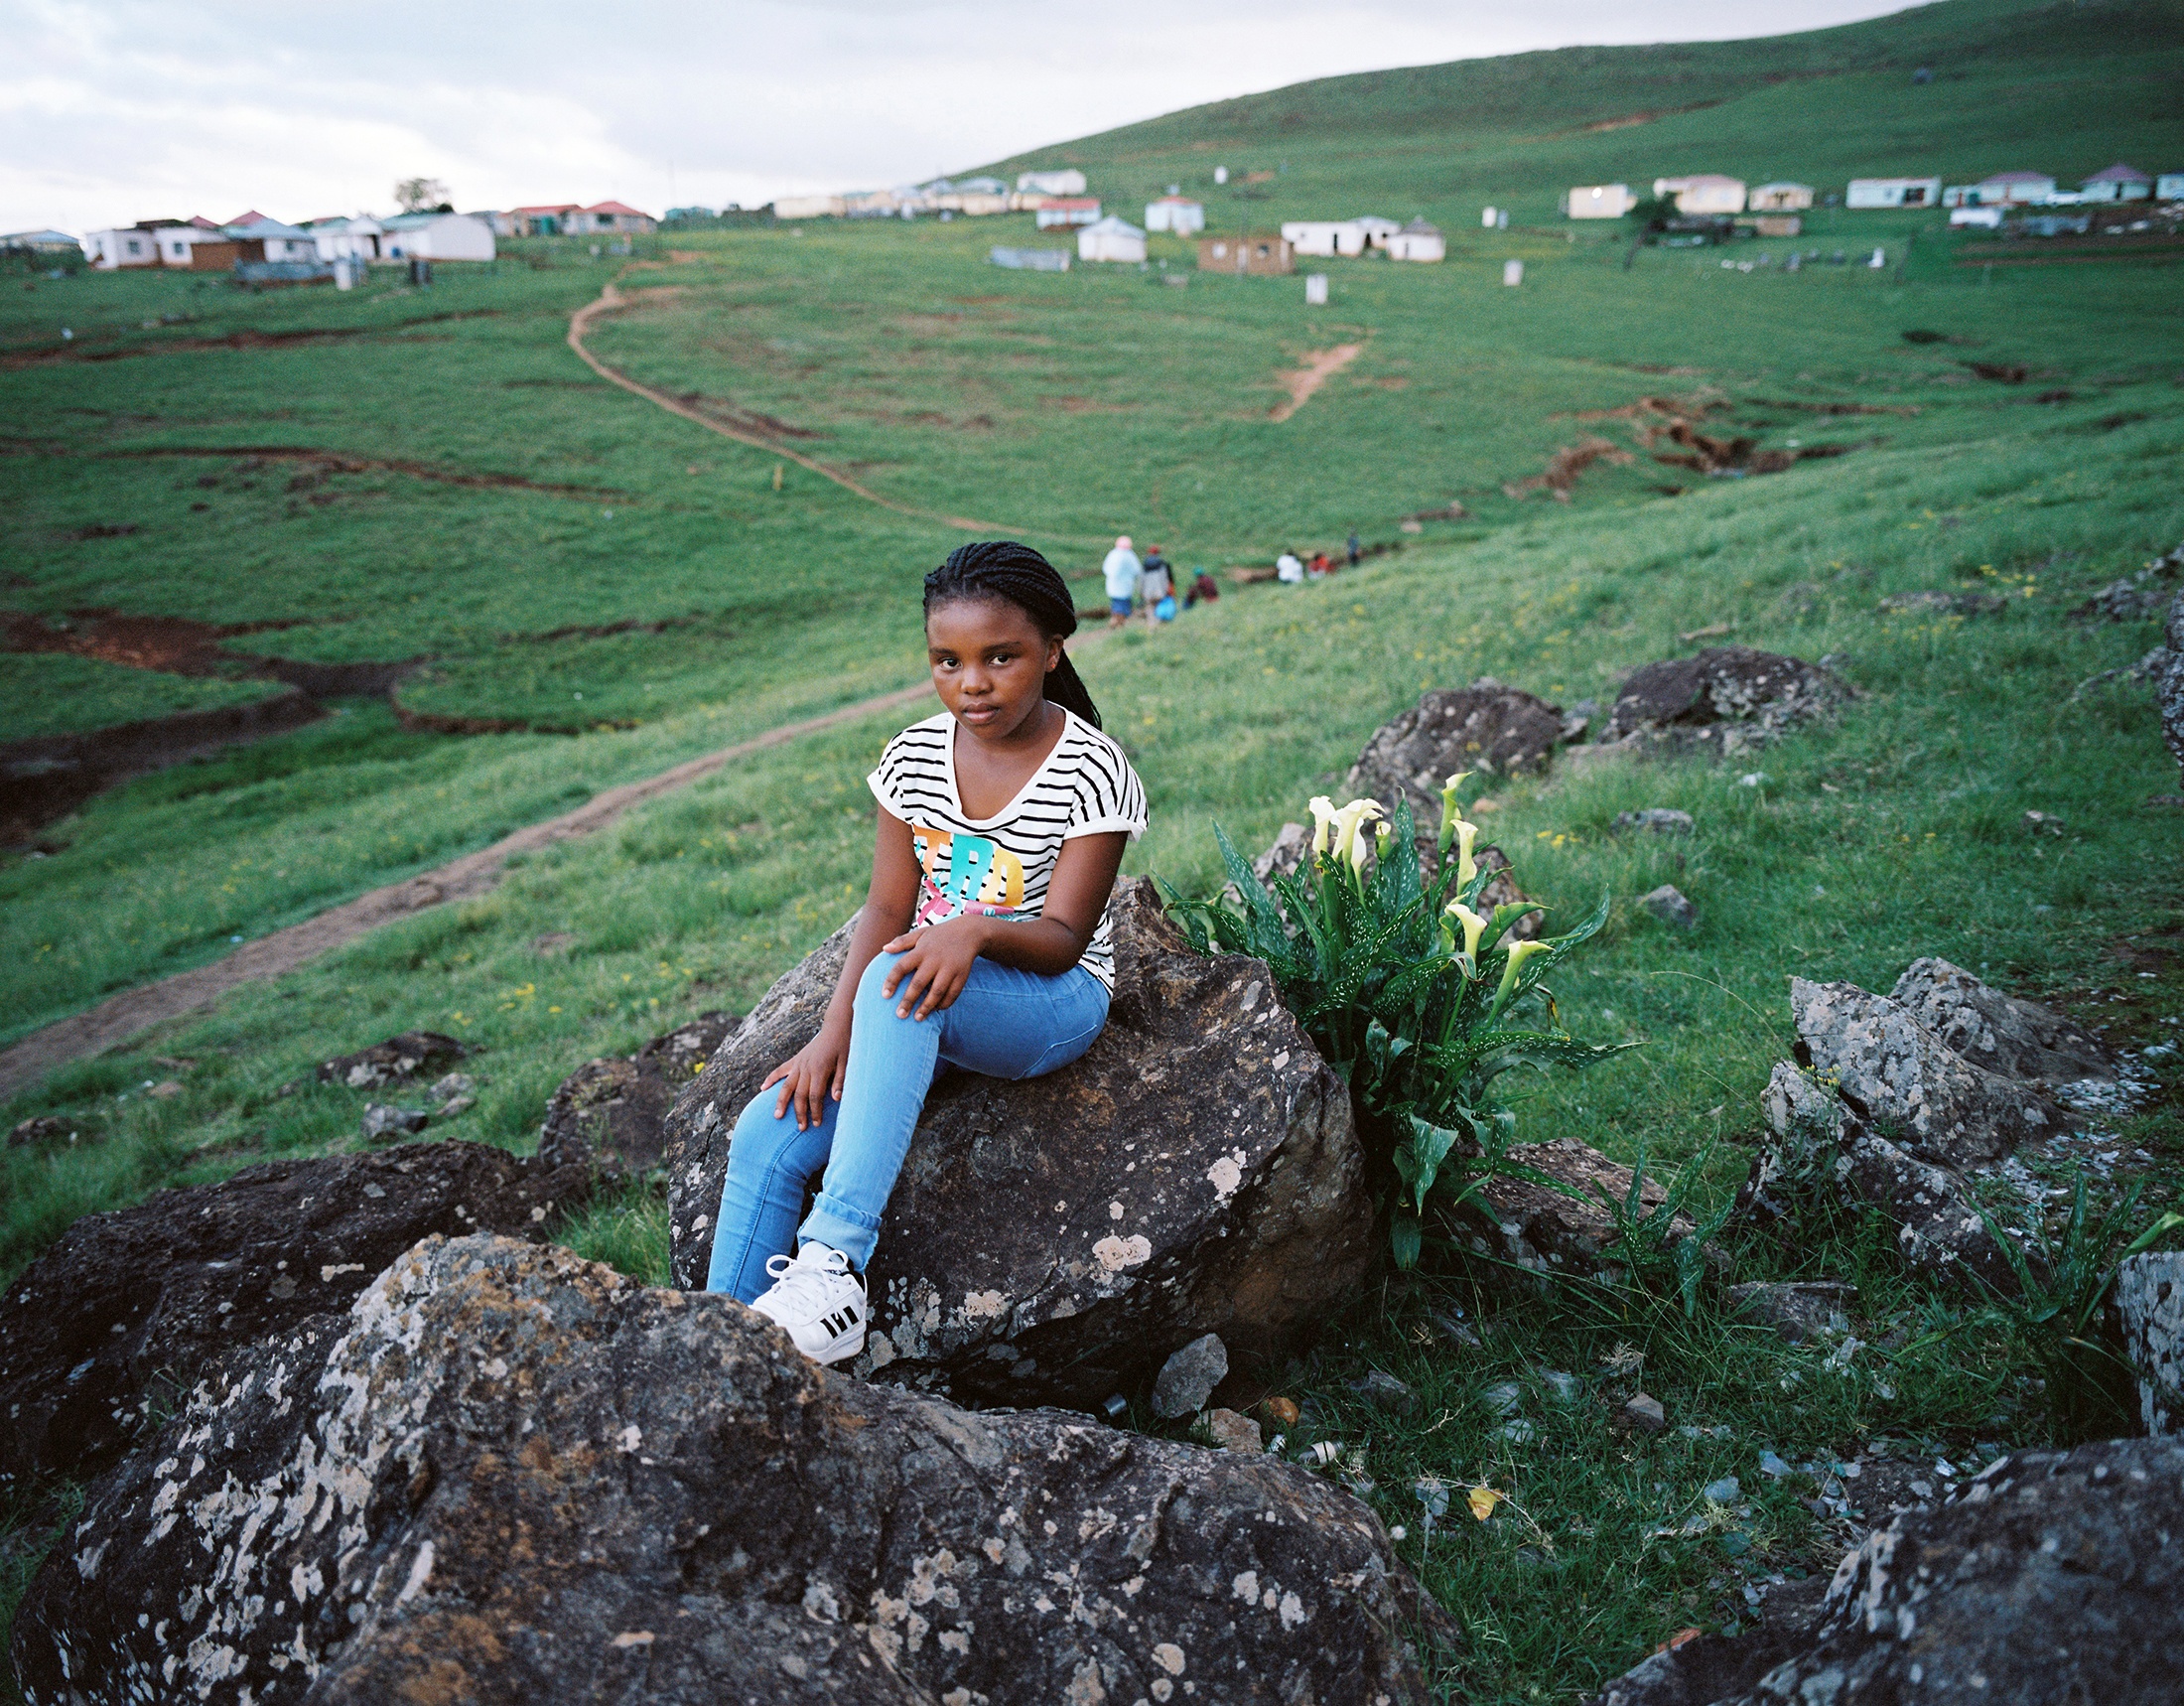 Lindokuhle Sobekwa's photograph 'Zenandi' shows a child sitting on an outcropping of rock on a grassy hill.
